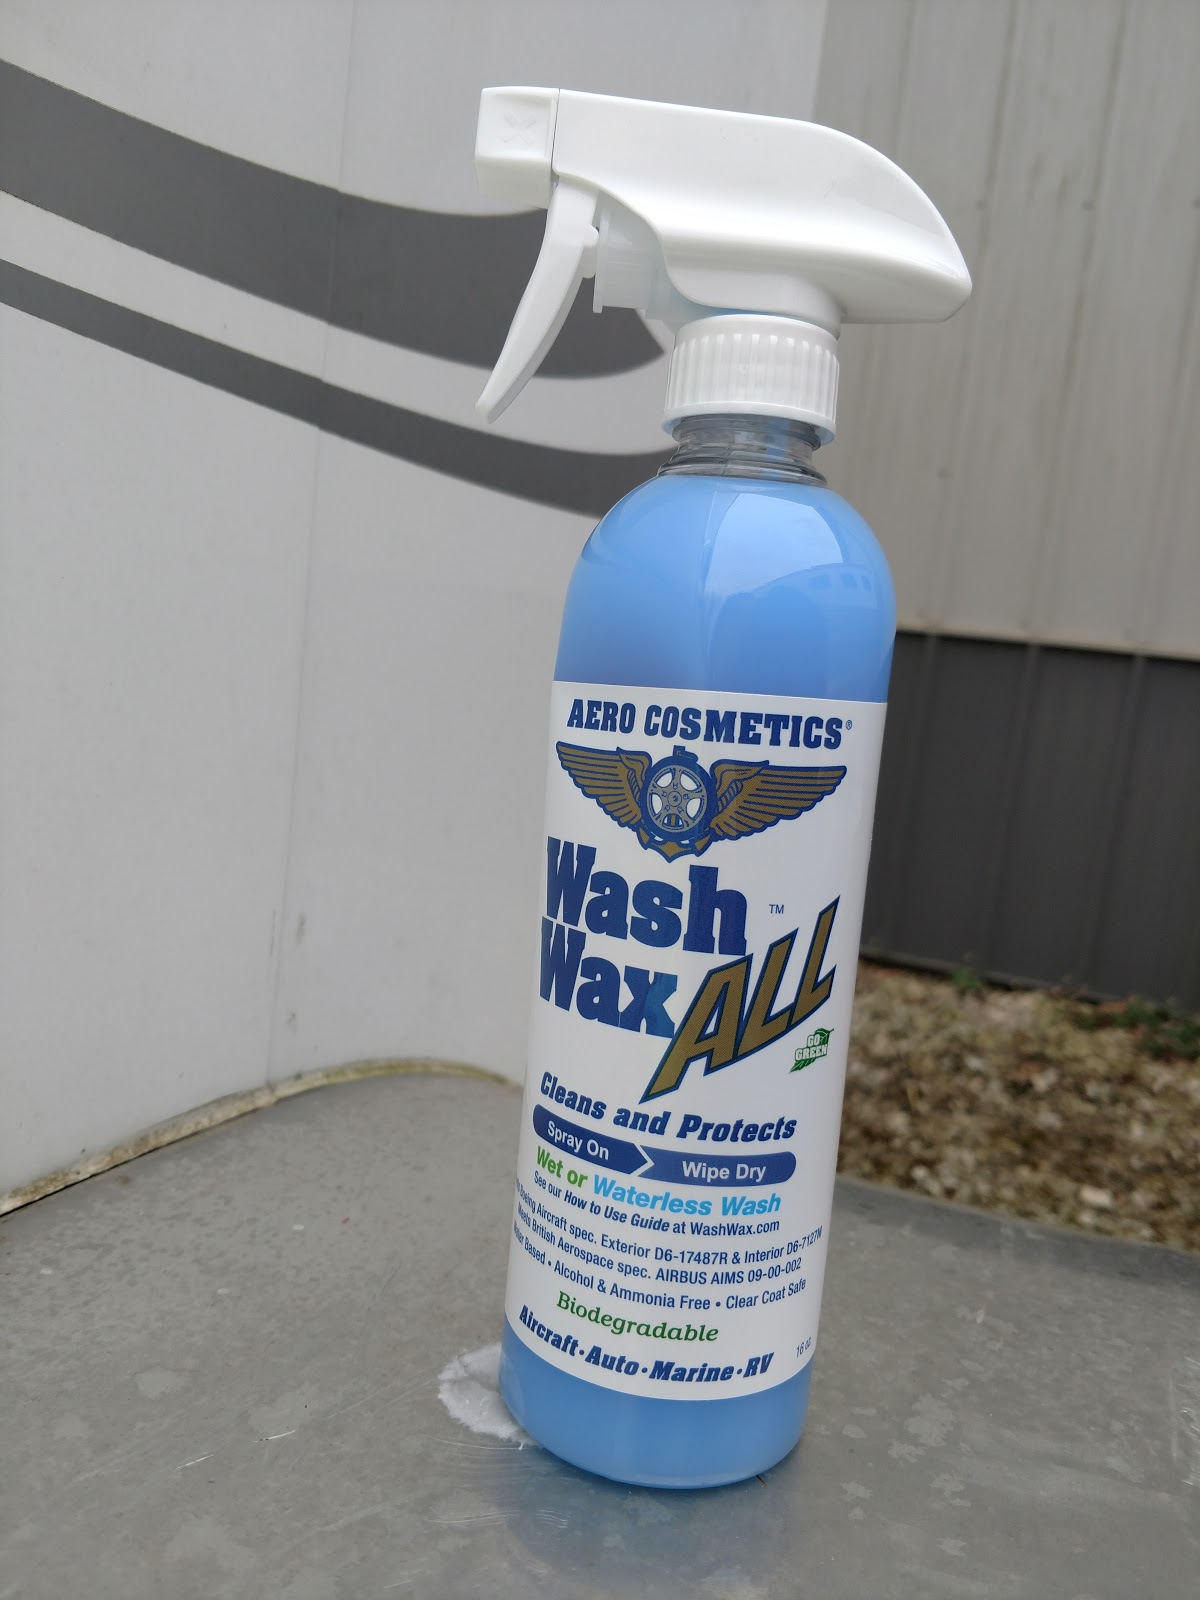 Aero Cosmetics Wash All Degreaser by Frasers Aerospace